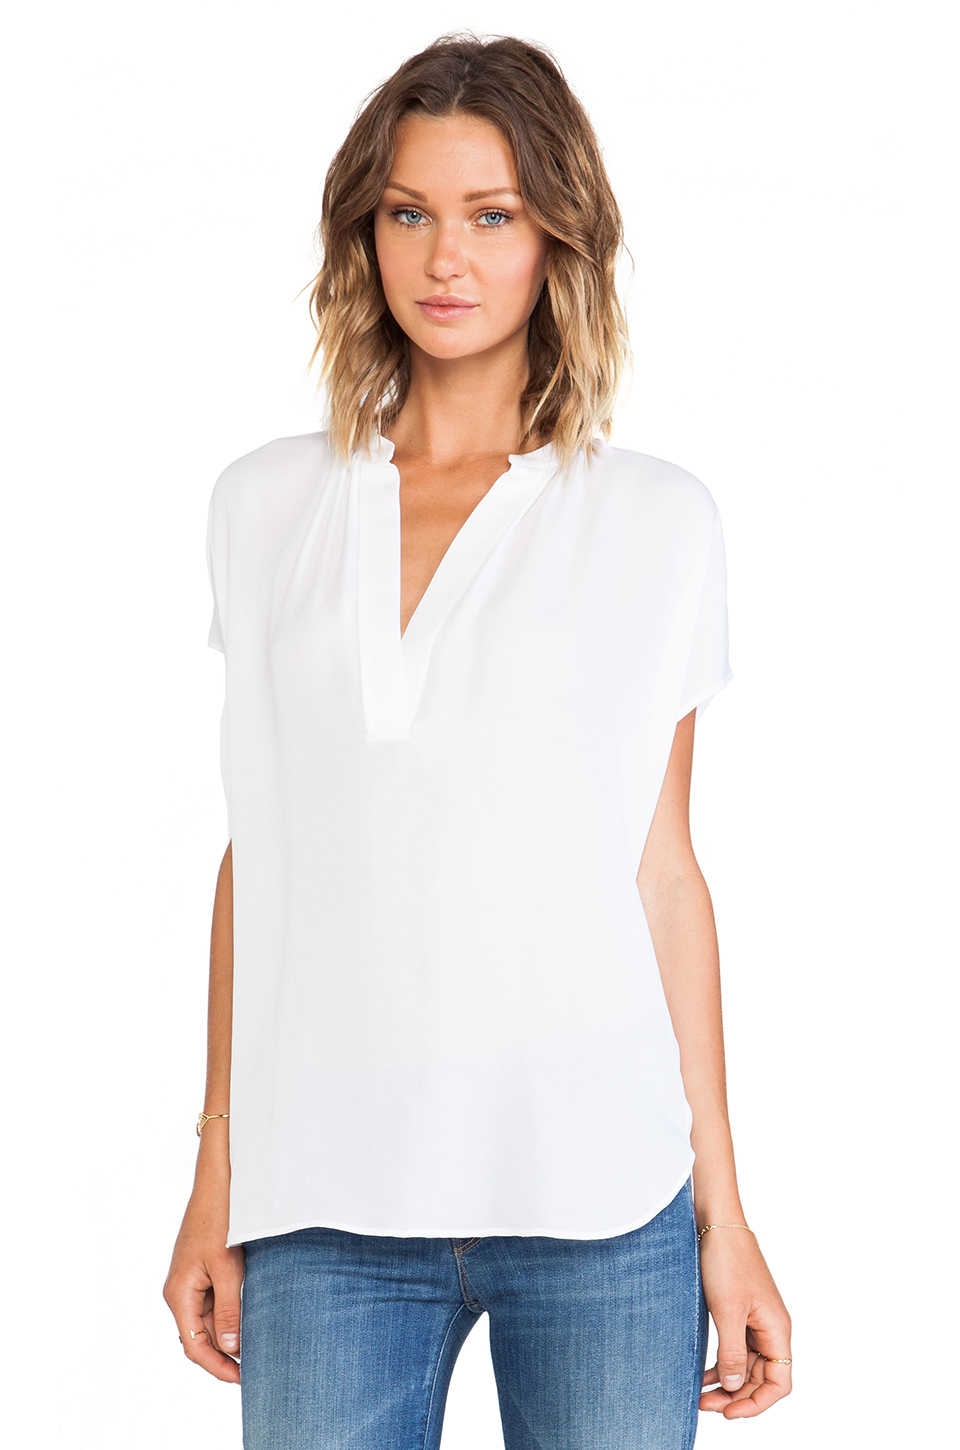 Lyst - Vince Cap Sleeve Popover Blouse in White